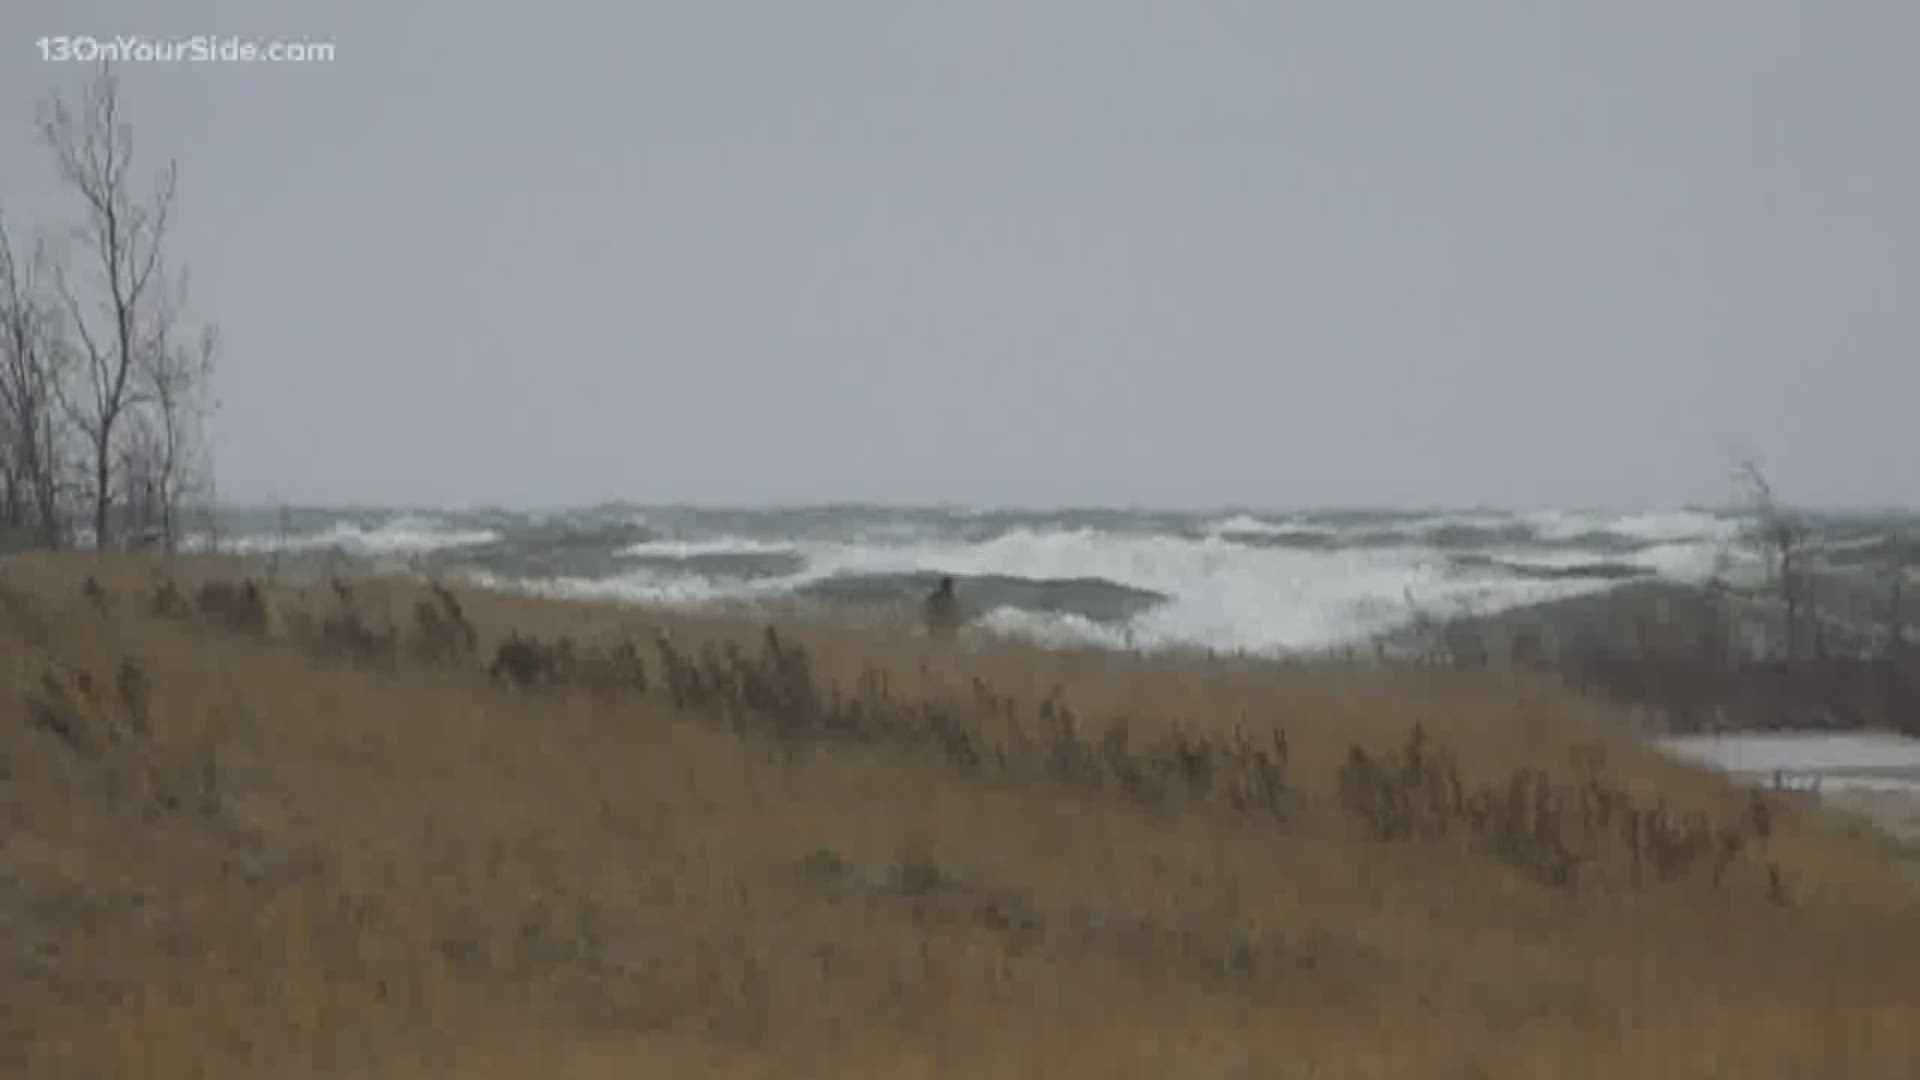 Strong winds and heavy rains caused high waves along the lakeshore on Wednesday.